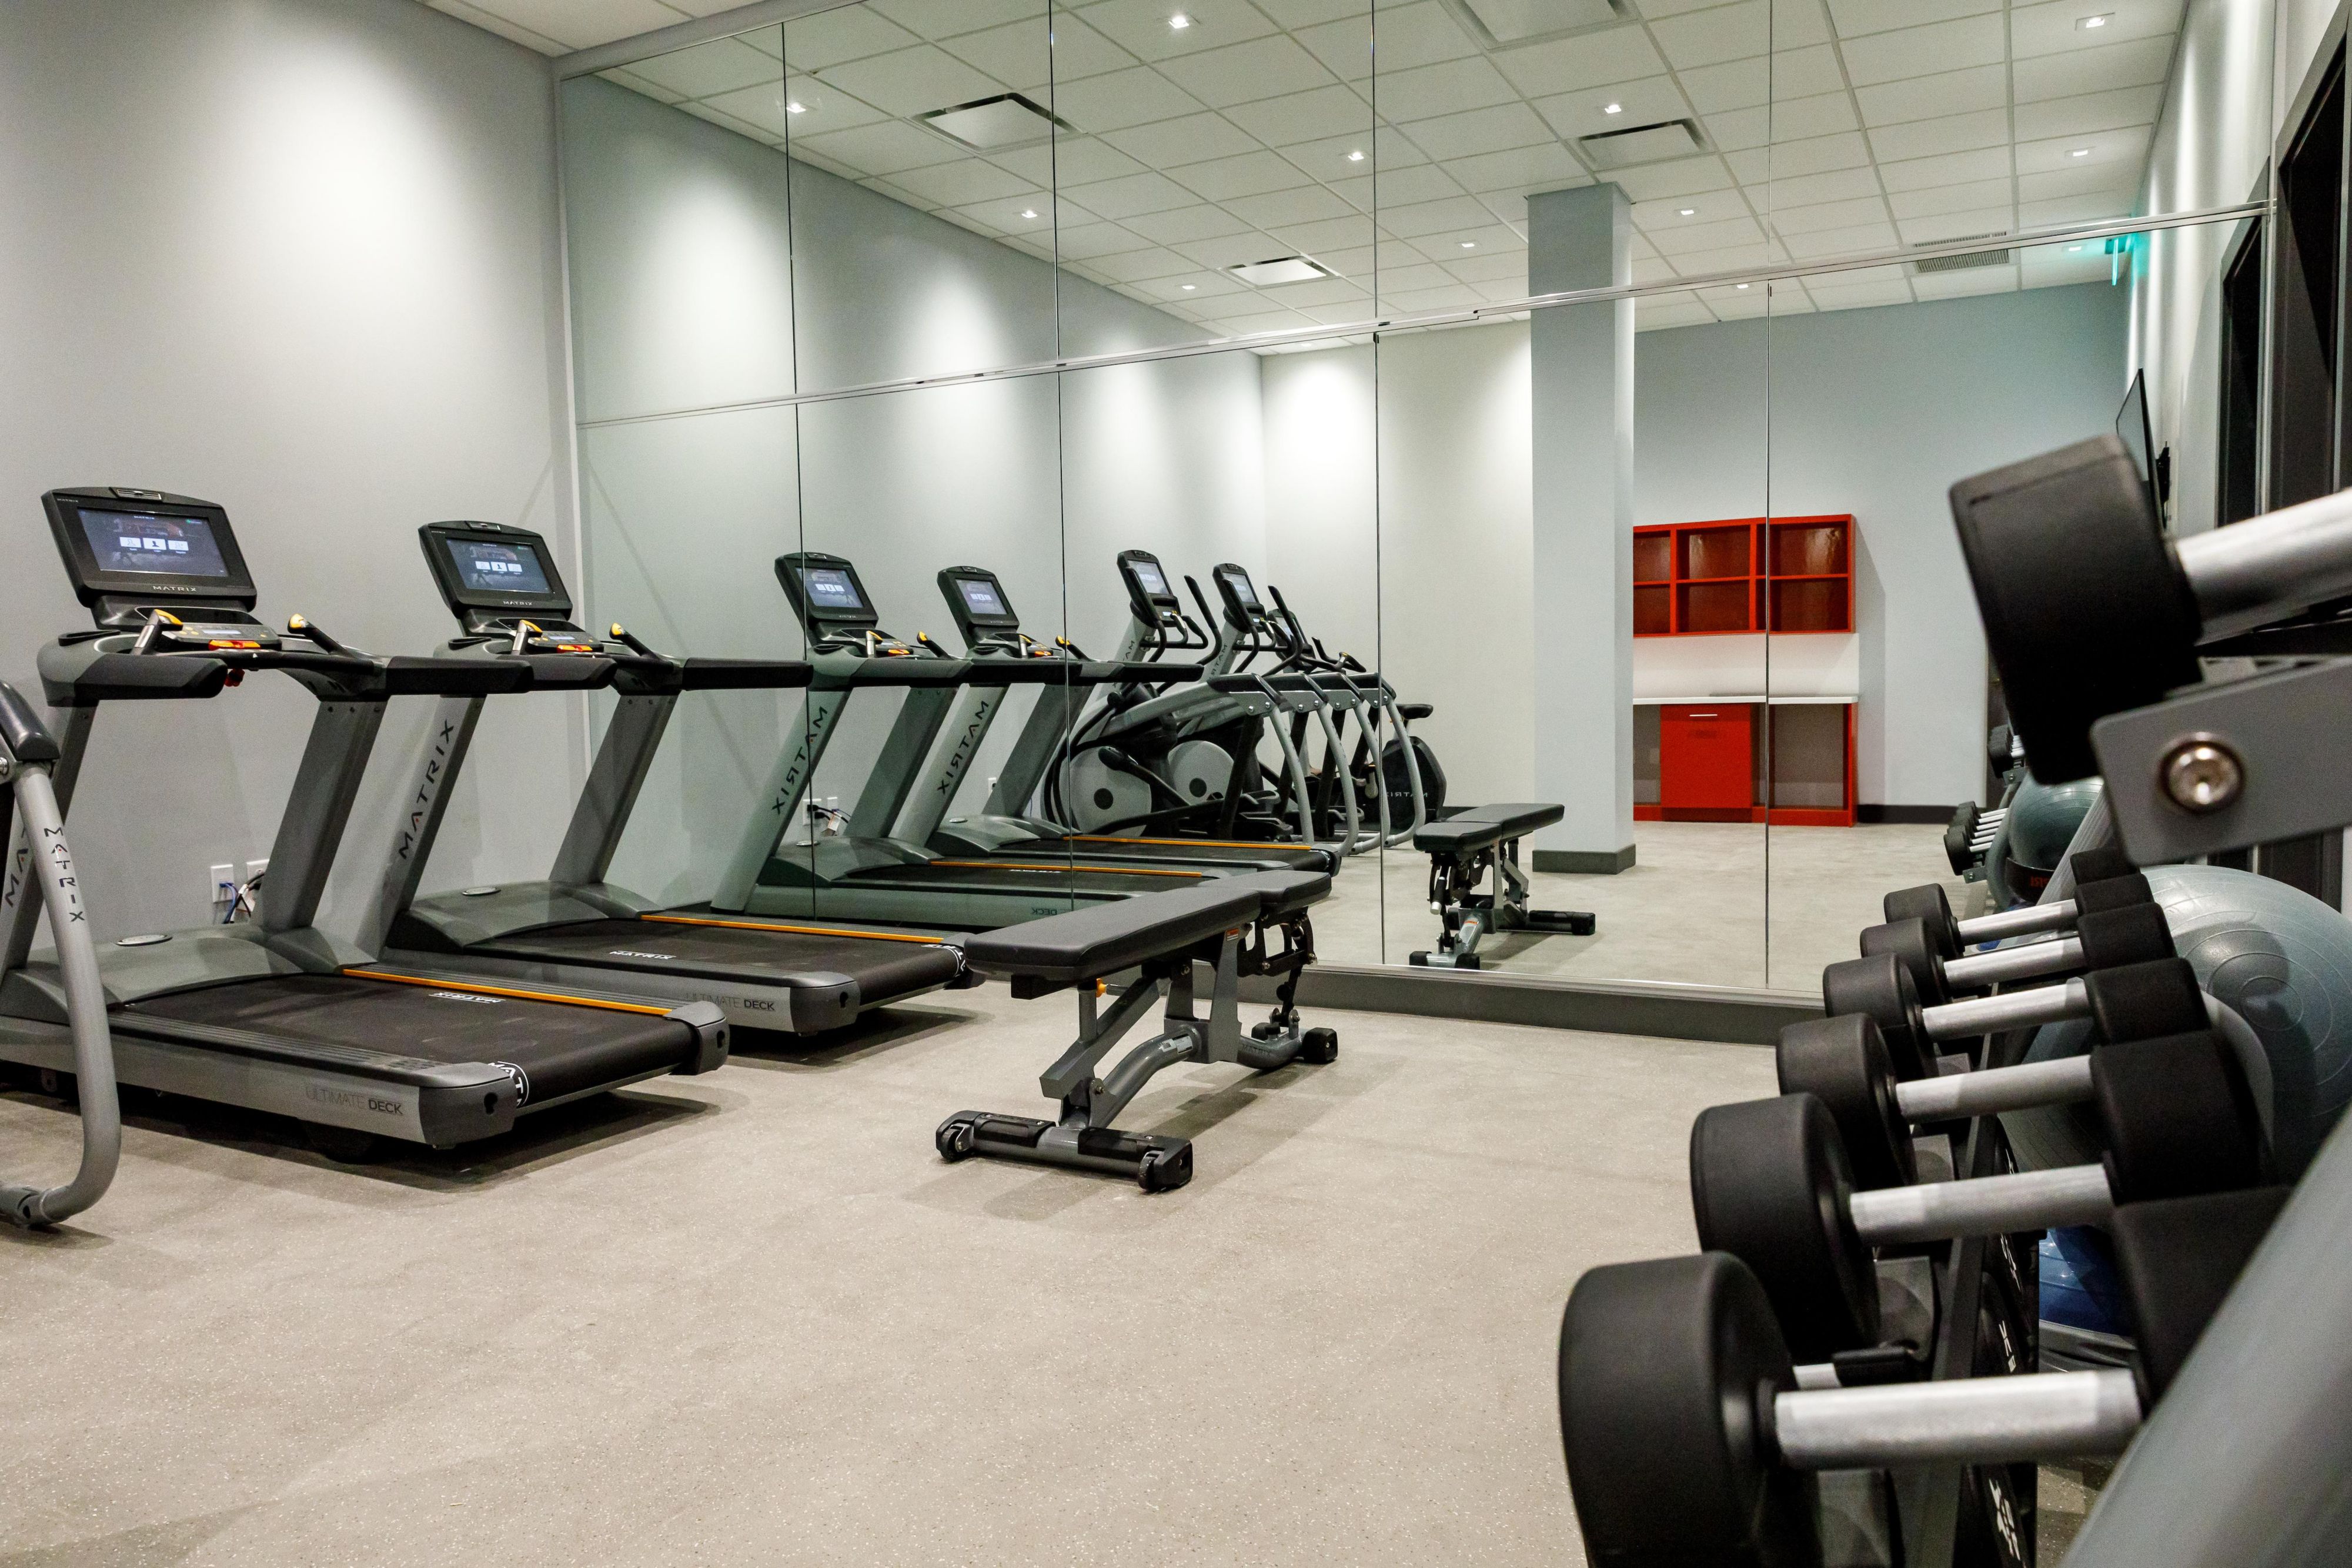 Keep up your workout routine and stay fit at Hotel Indigo® St. Louis Downtown. Our 24-hour Fitness Center features new Matrix cardio equipment, including treadmills and bikes, free weights, a bench, and mirrors in an energizing space.